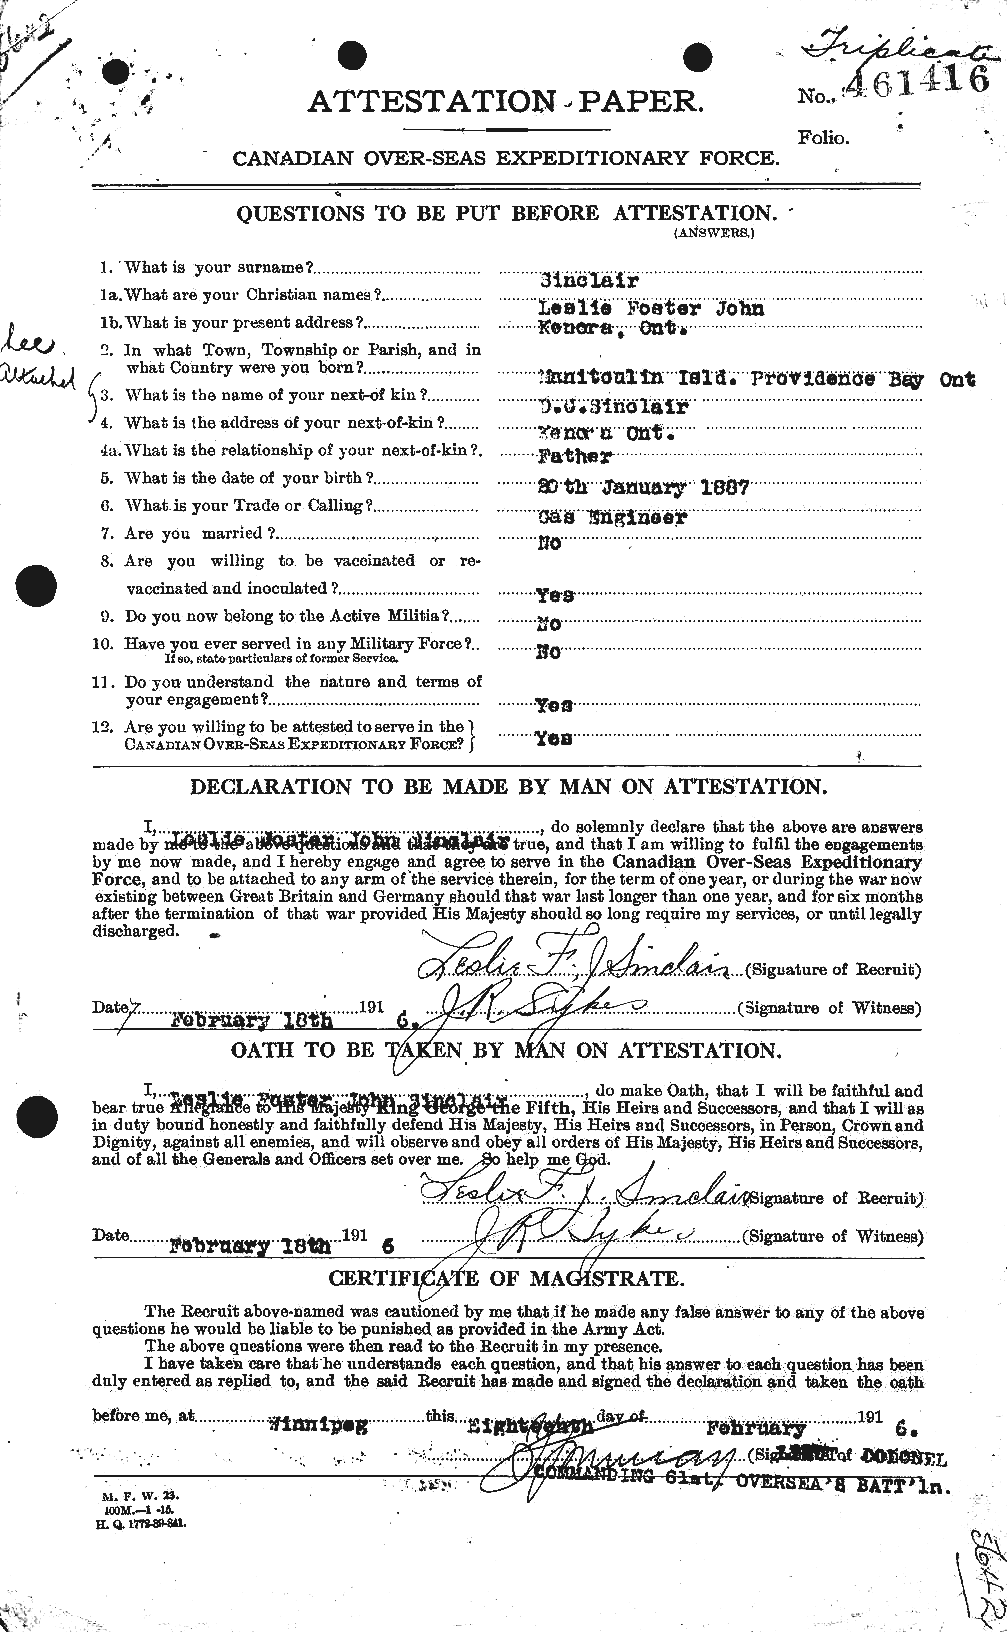 Personnel Records of the First World War - CEF 622483a